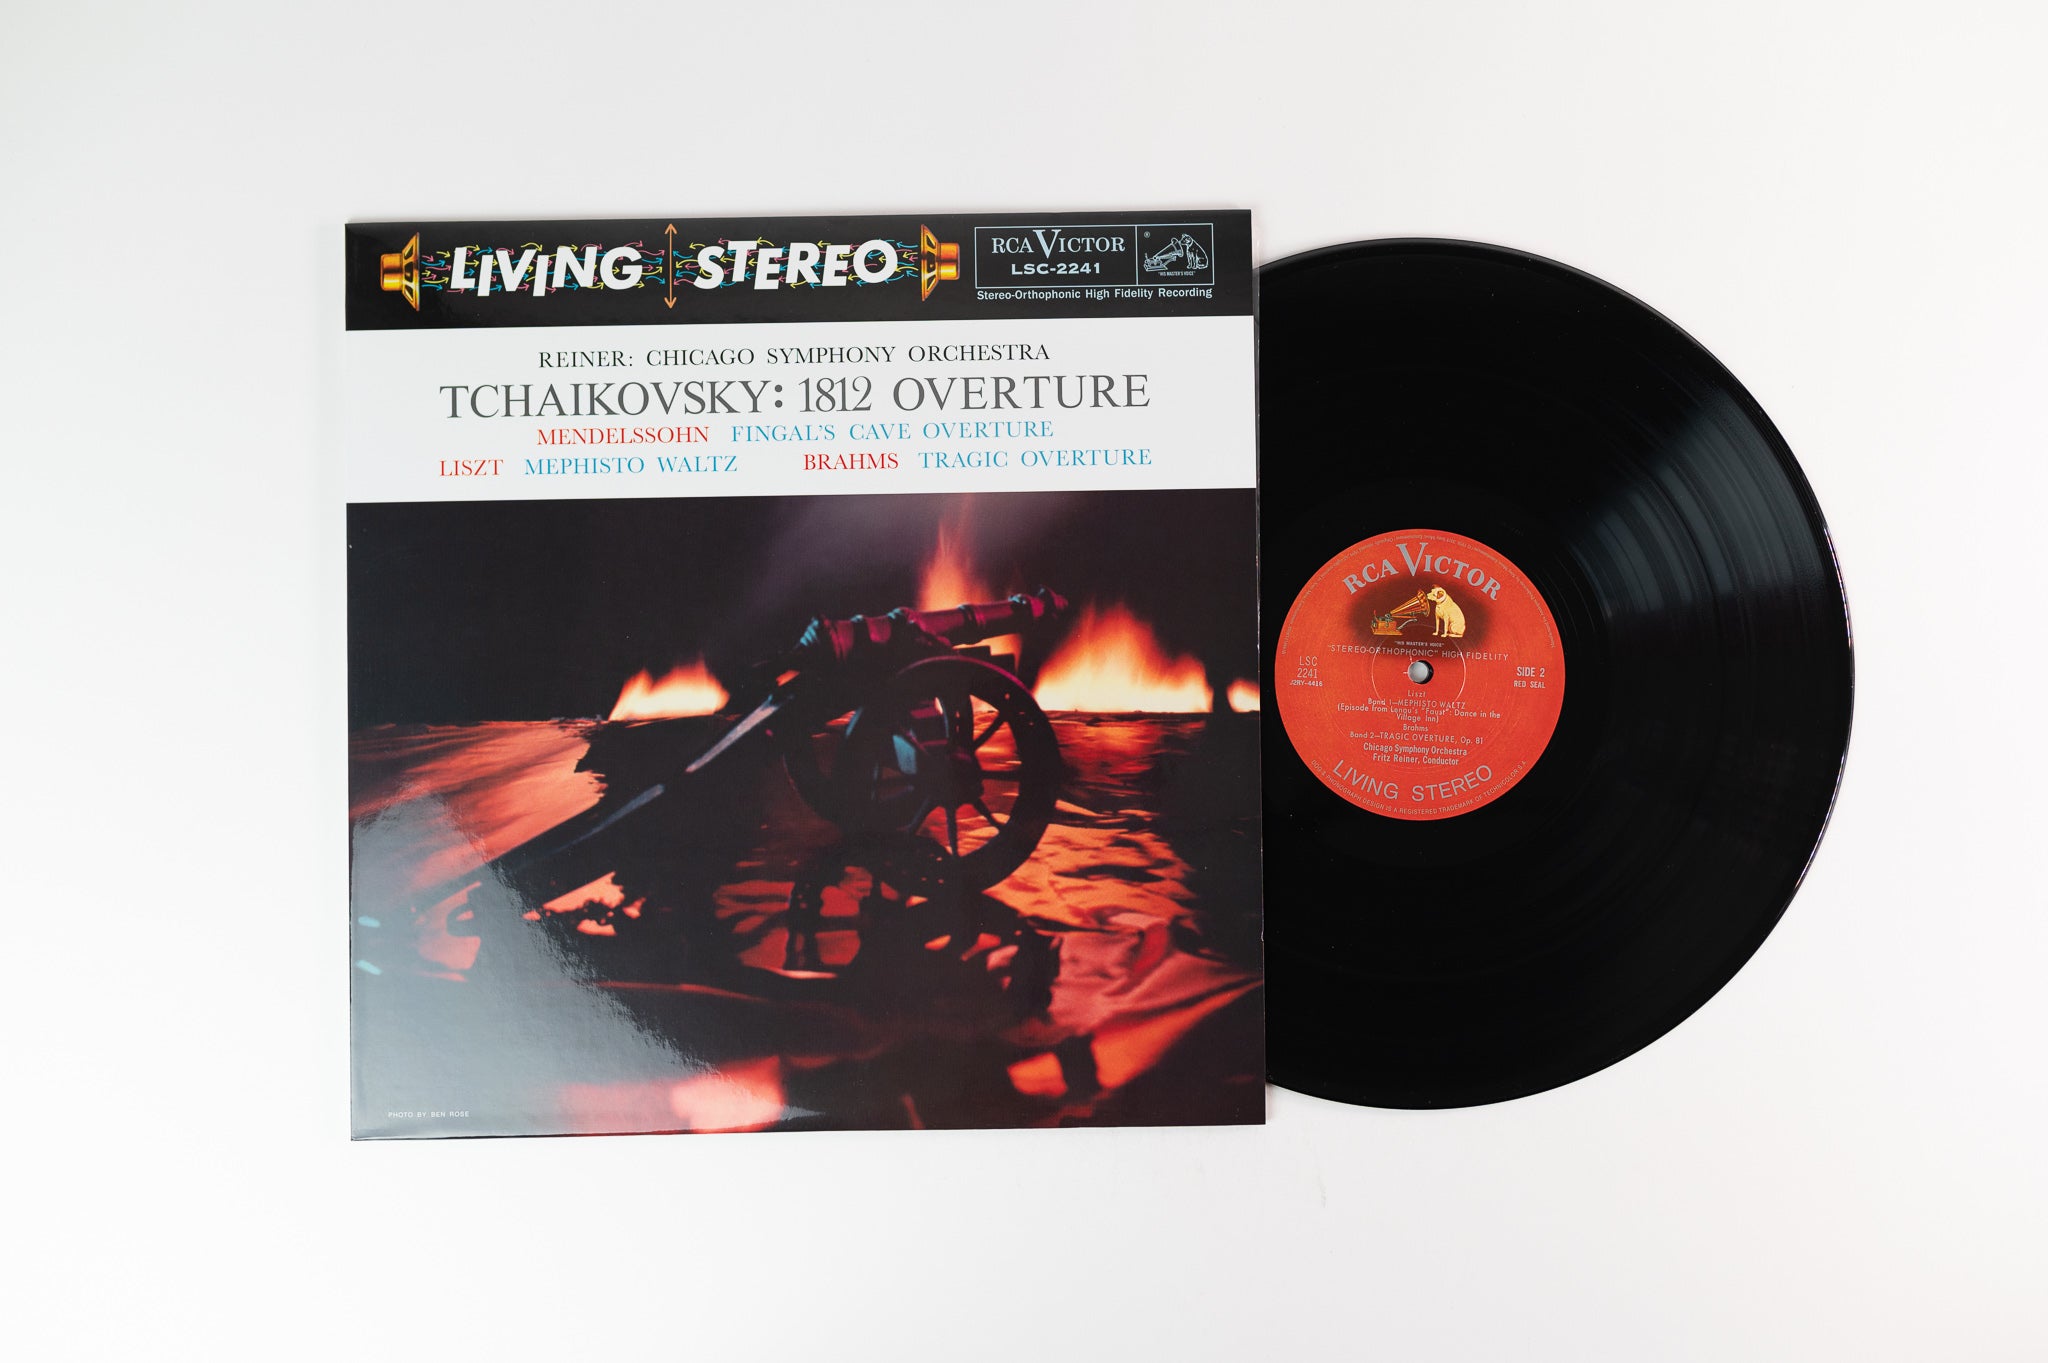 Fritz Reiner Chicago Symphony - Tchaikovsky - 1812 Overture on RCA Analogue Productions Reissue